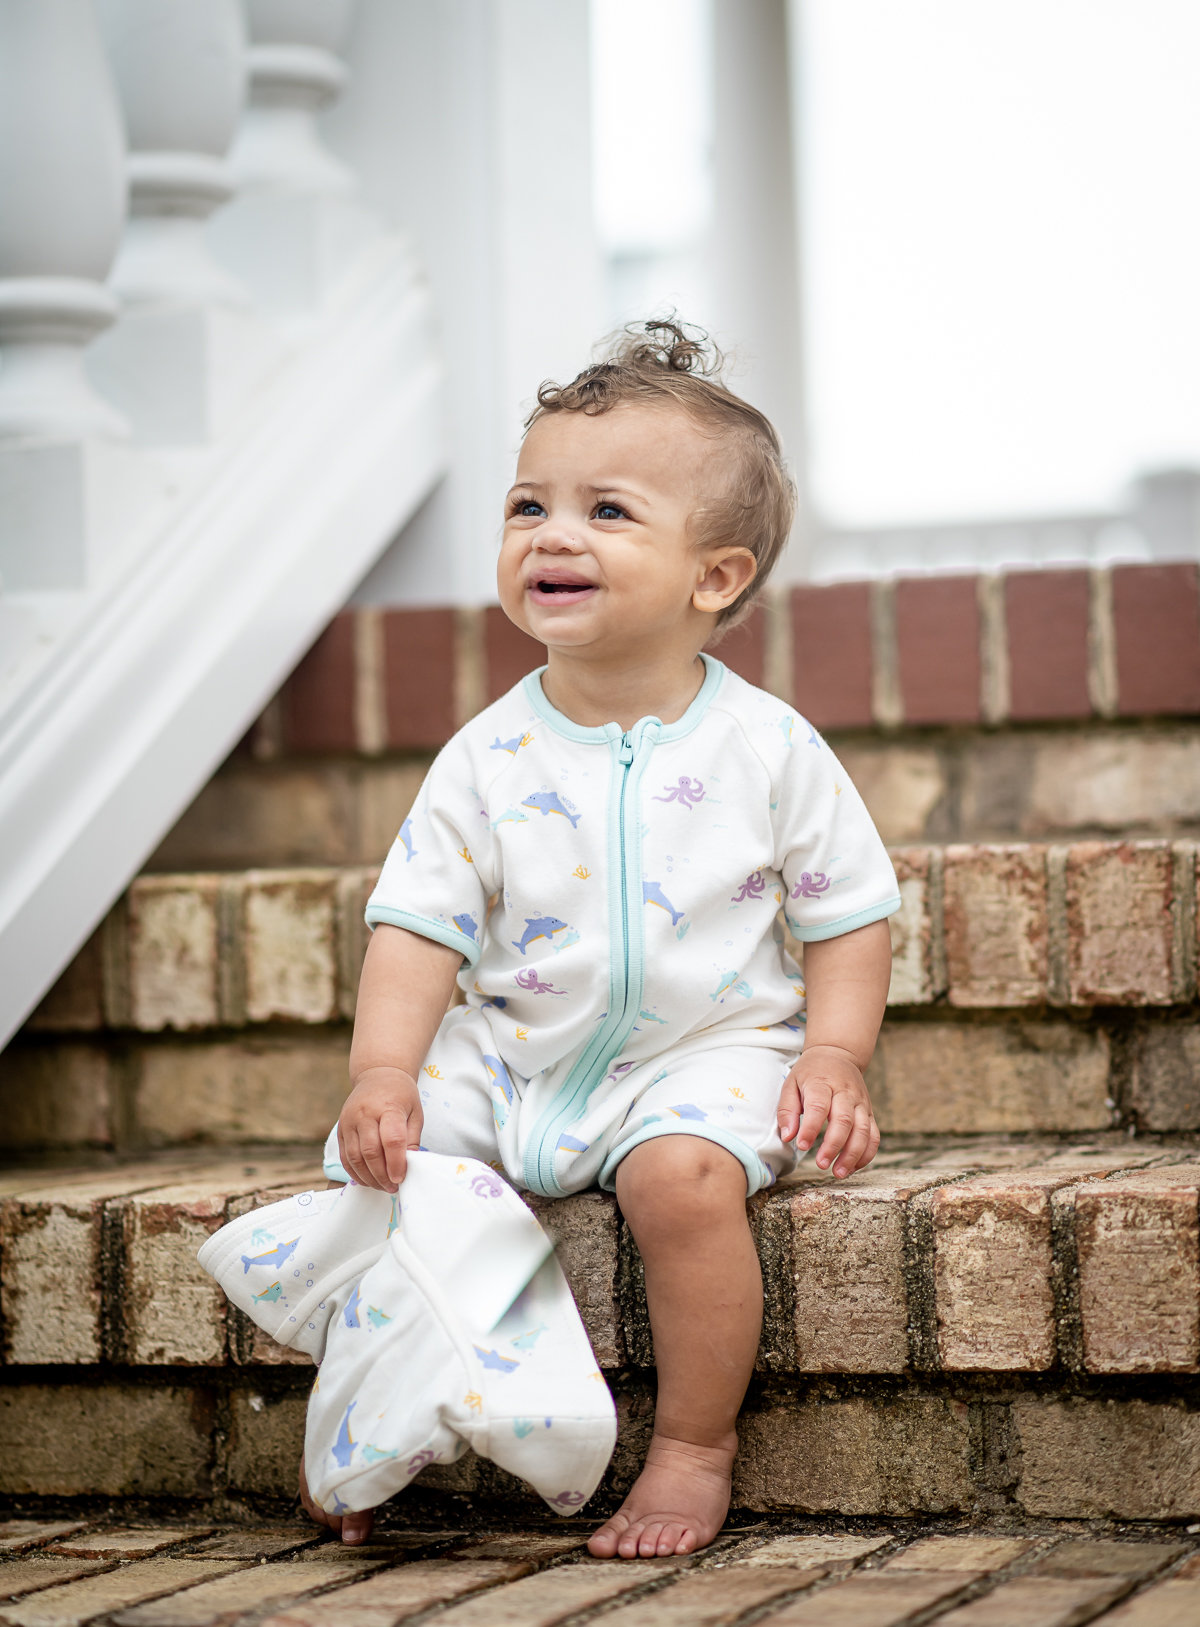 17 Wonderful Summer Outfit Ideas To Make Your Kids Shine In Summertime